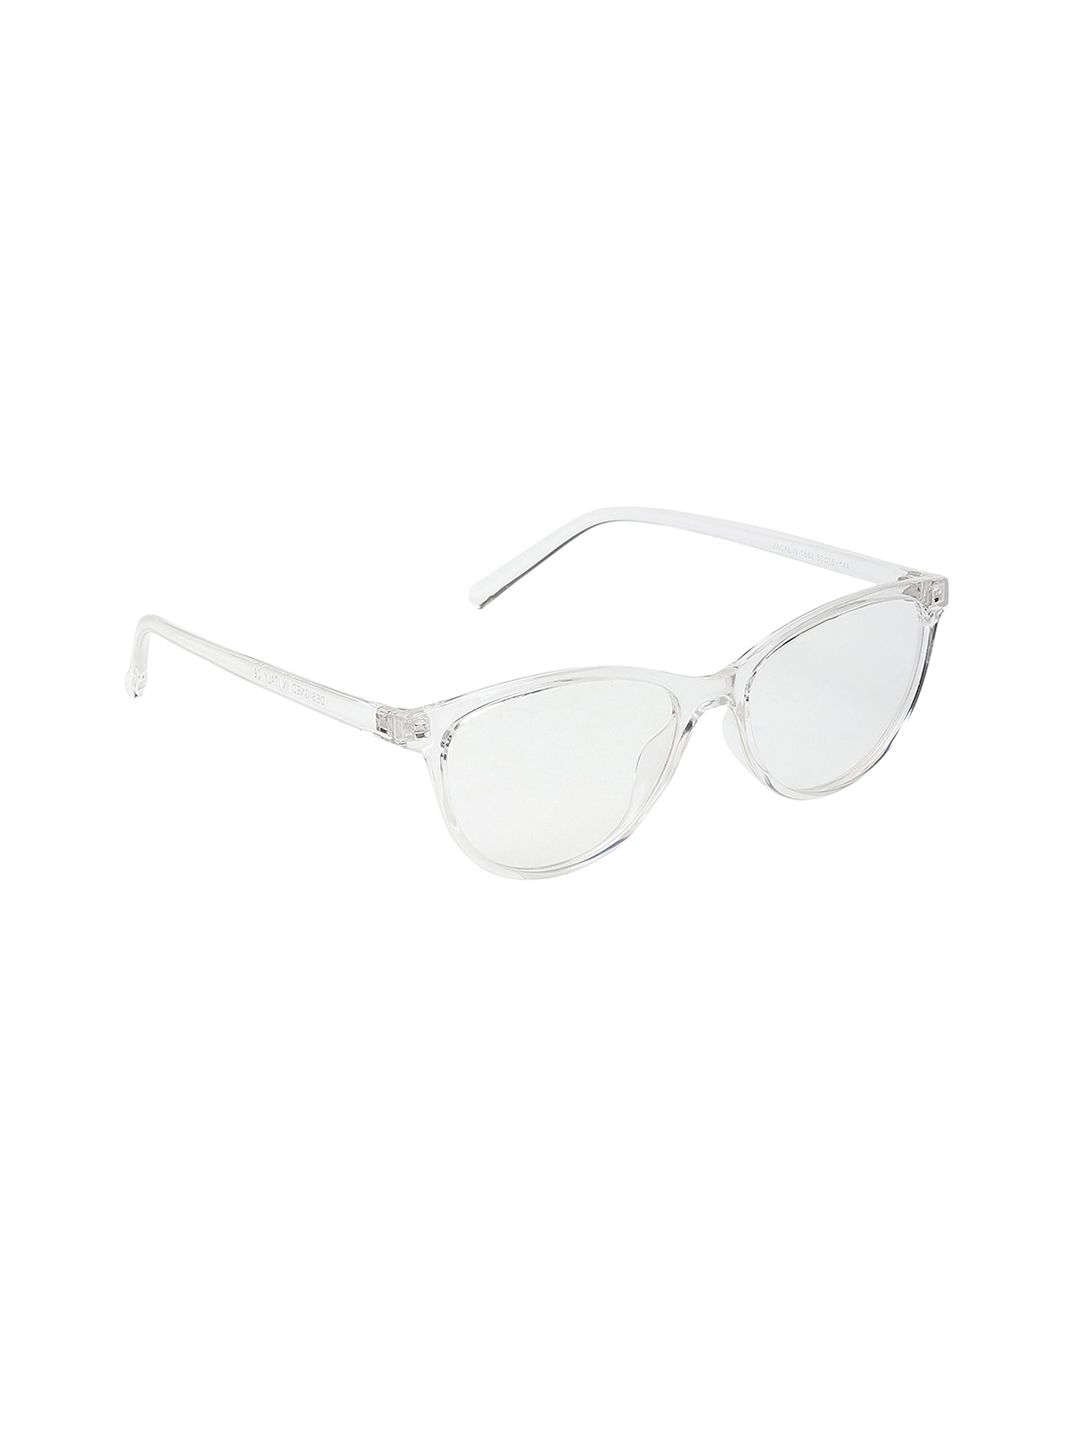 CRIBA Unisex Clear Lens & White Oval Sunglass with UV Protected Lens - CR_RAFA TRANS_CLEAR Price in India